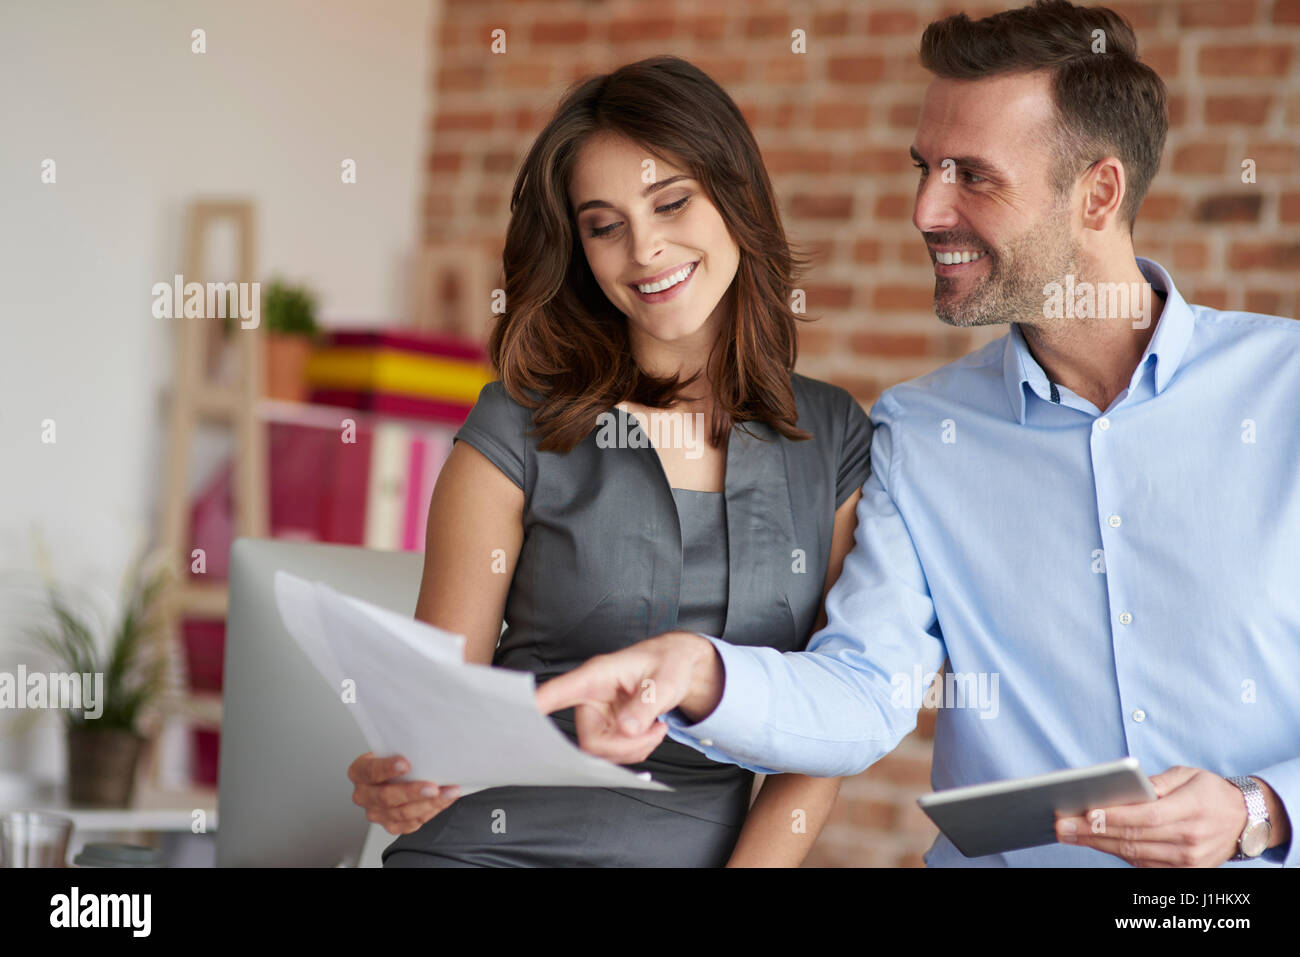 Checking some documents in good mood Stock Photo